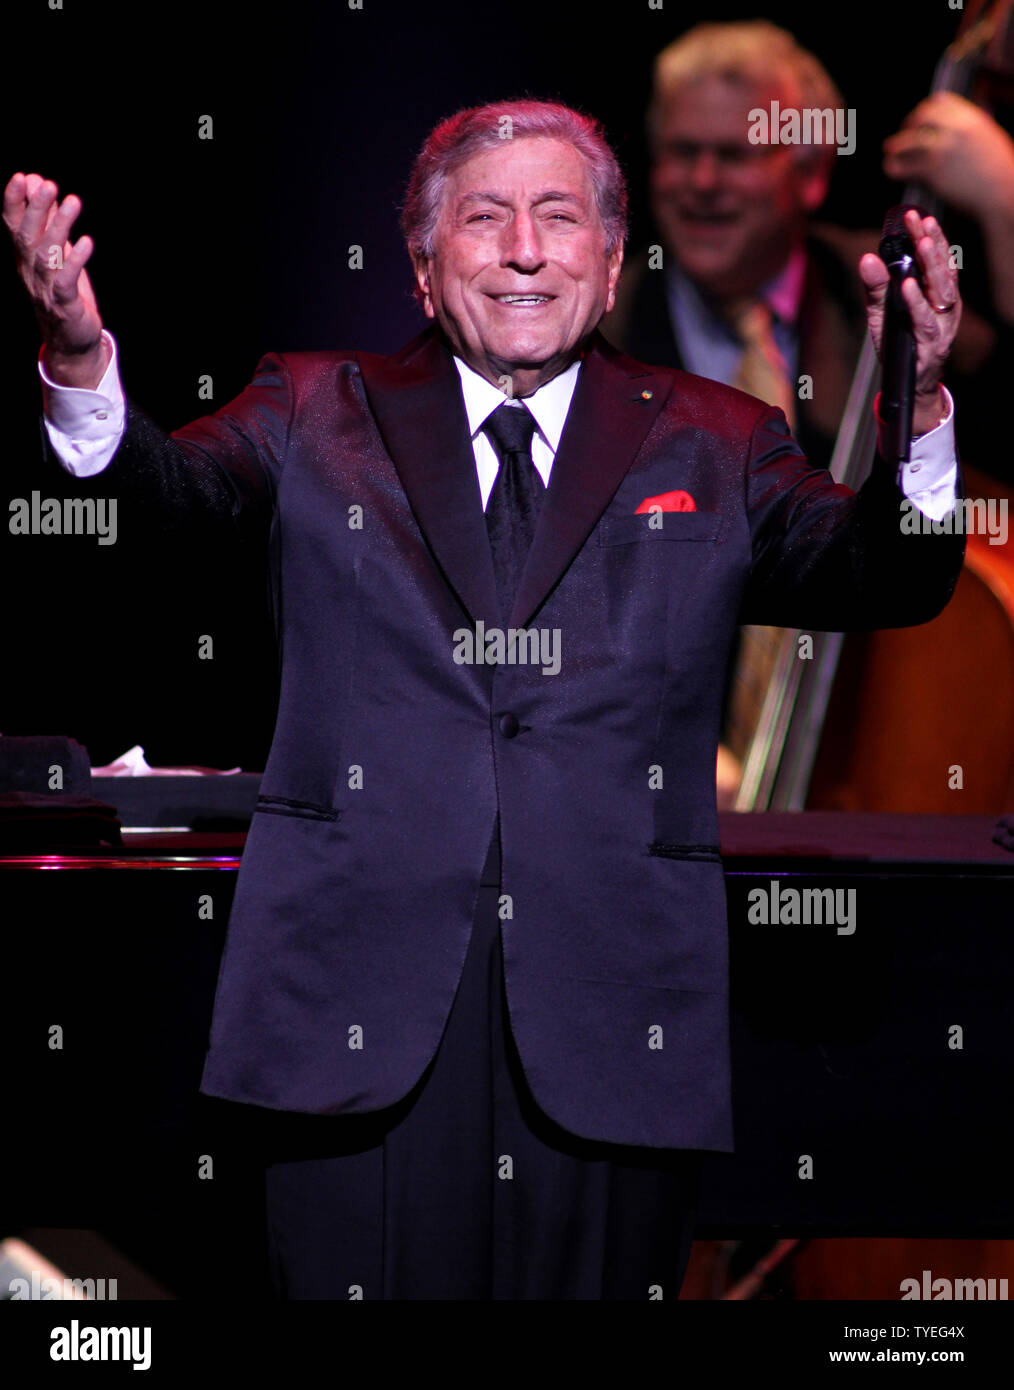 Tony Bennett performs in concert at the Broward Center for the Performing Arts in Fort Lauderdale, Florida on February 27, 2013. UPI/Michael Bush Stock Photo